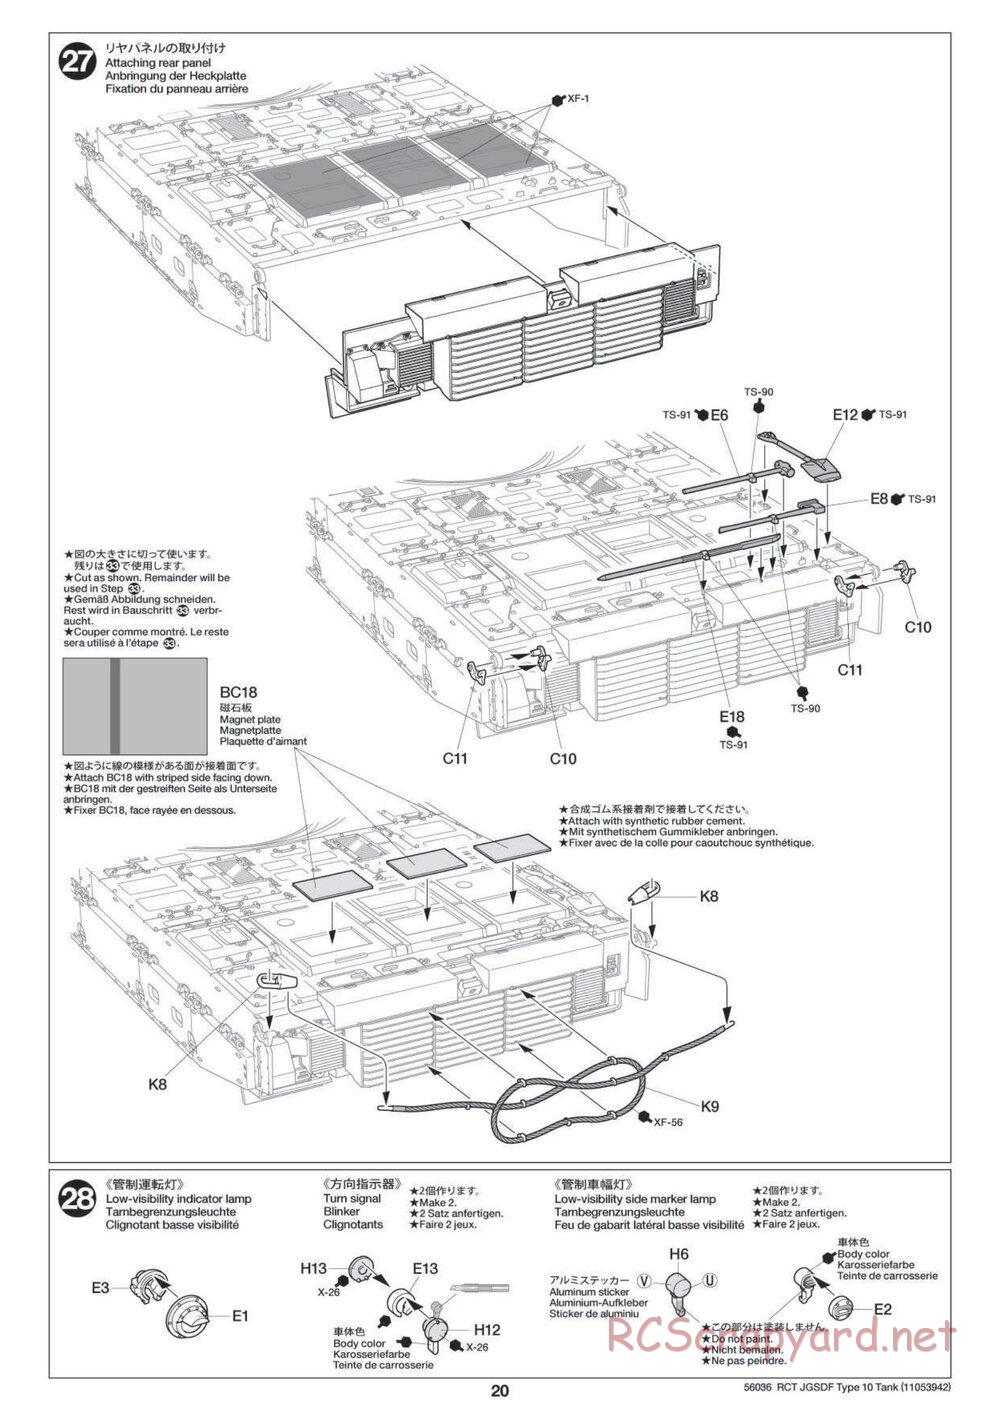 Tamiya - JGSDF Type 10 Tank - 1/16 Scale Chassis - Manual - Page 20